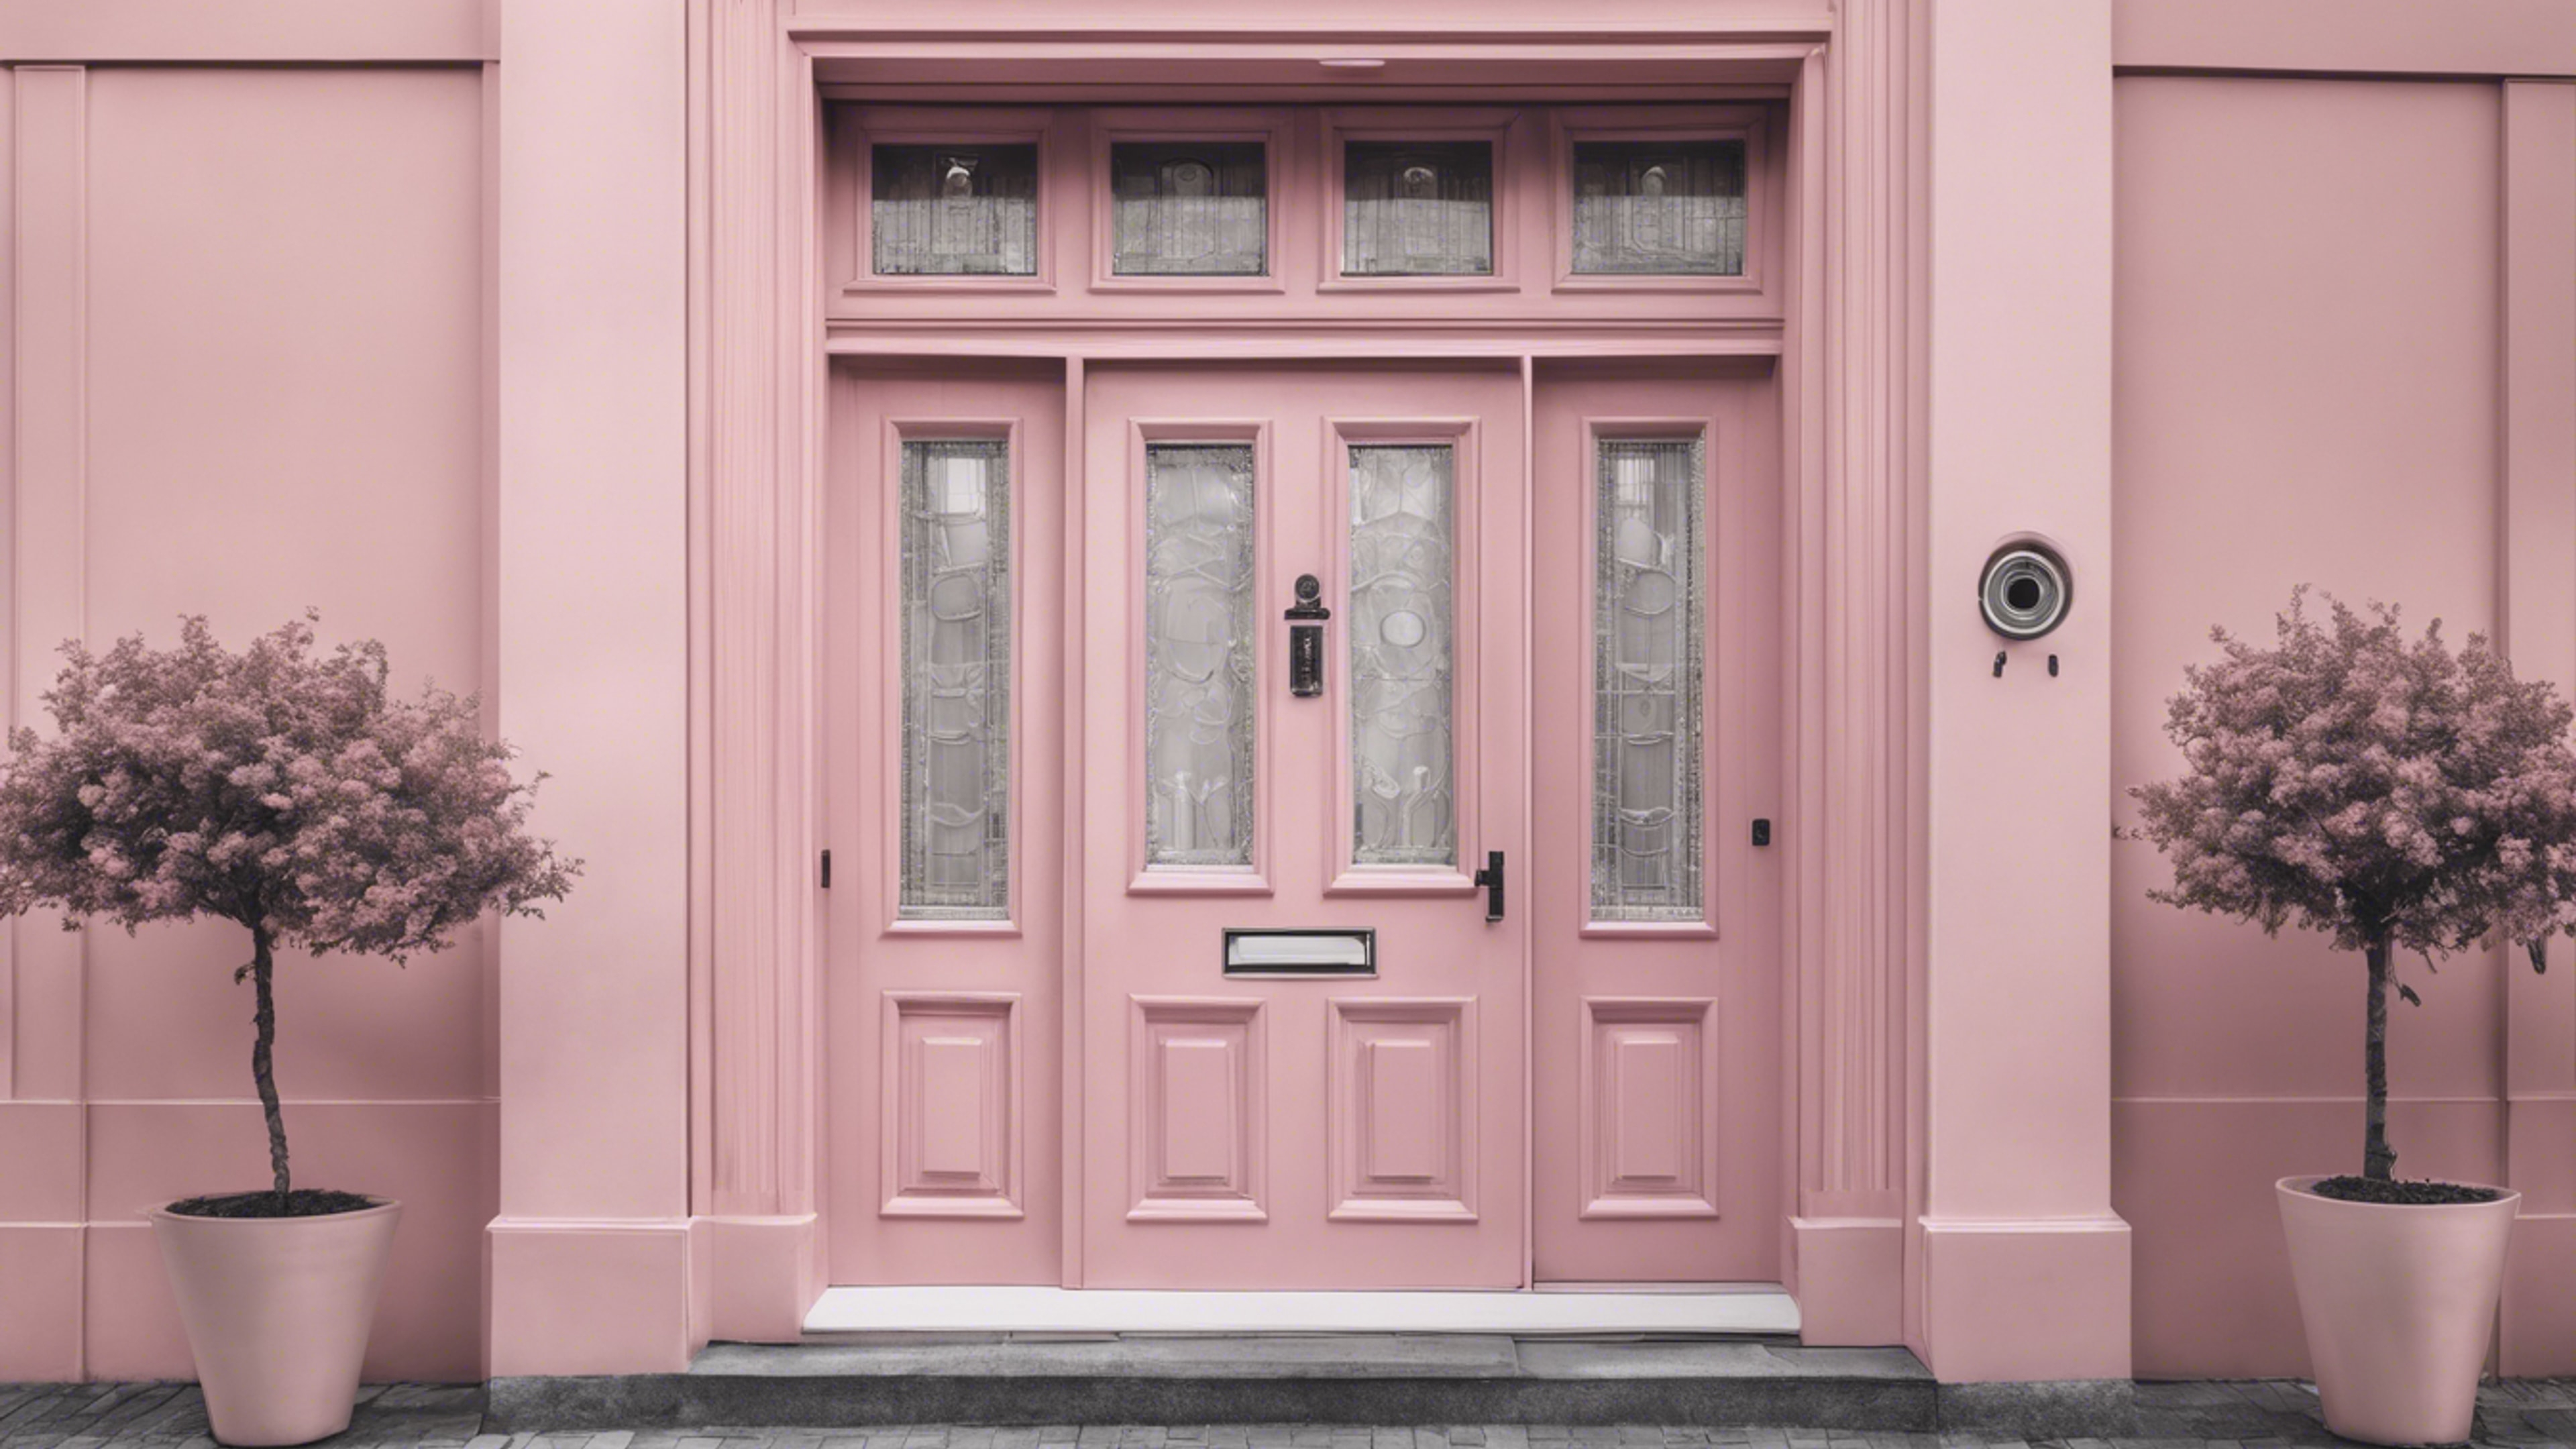 Monochrome image of a sophisticated townhouse door painted in a fetching preppy pastel pink. Tapeet[a9cdce63c1c94c029691]